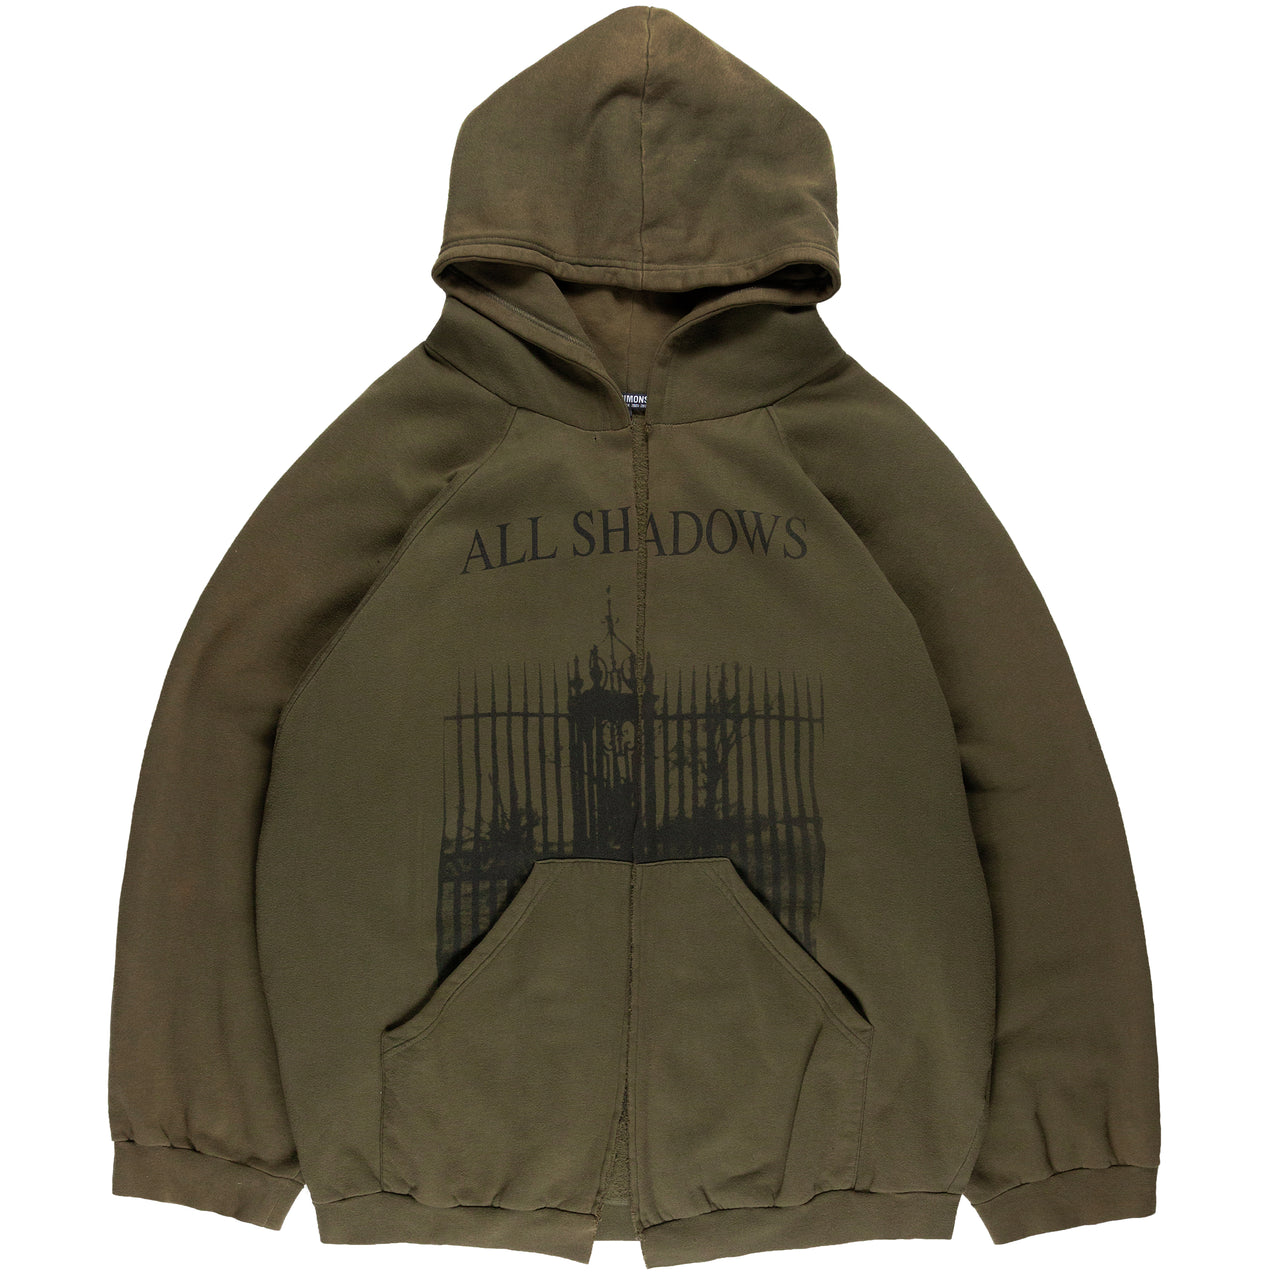 Raf Simons “All Shadows & Deliverance” Hoodie - AW05 “History Of My World”